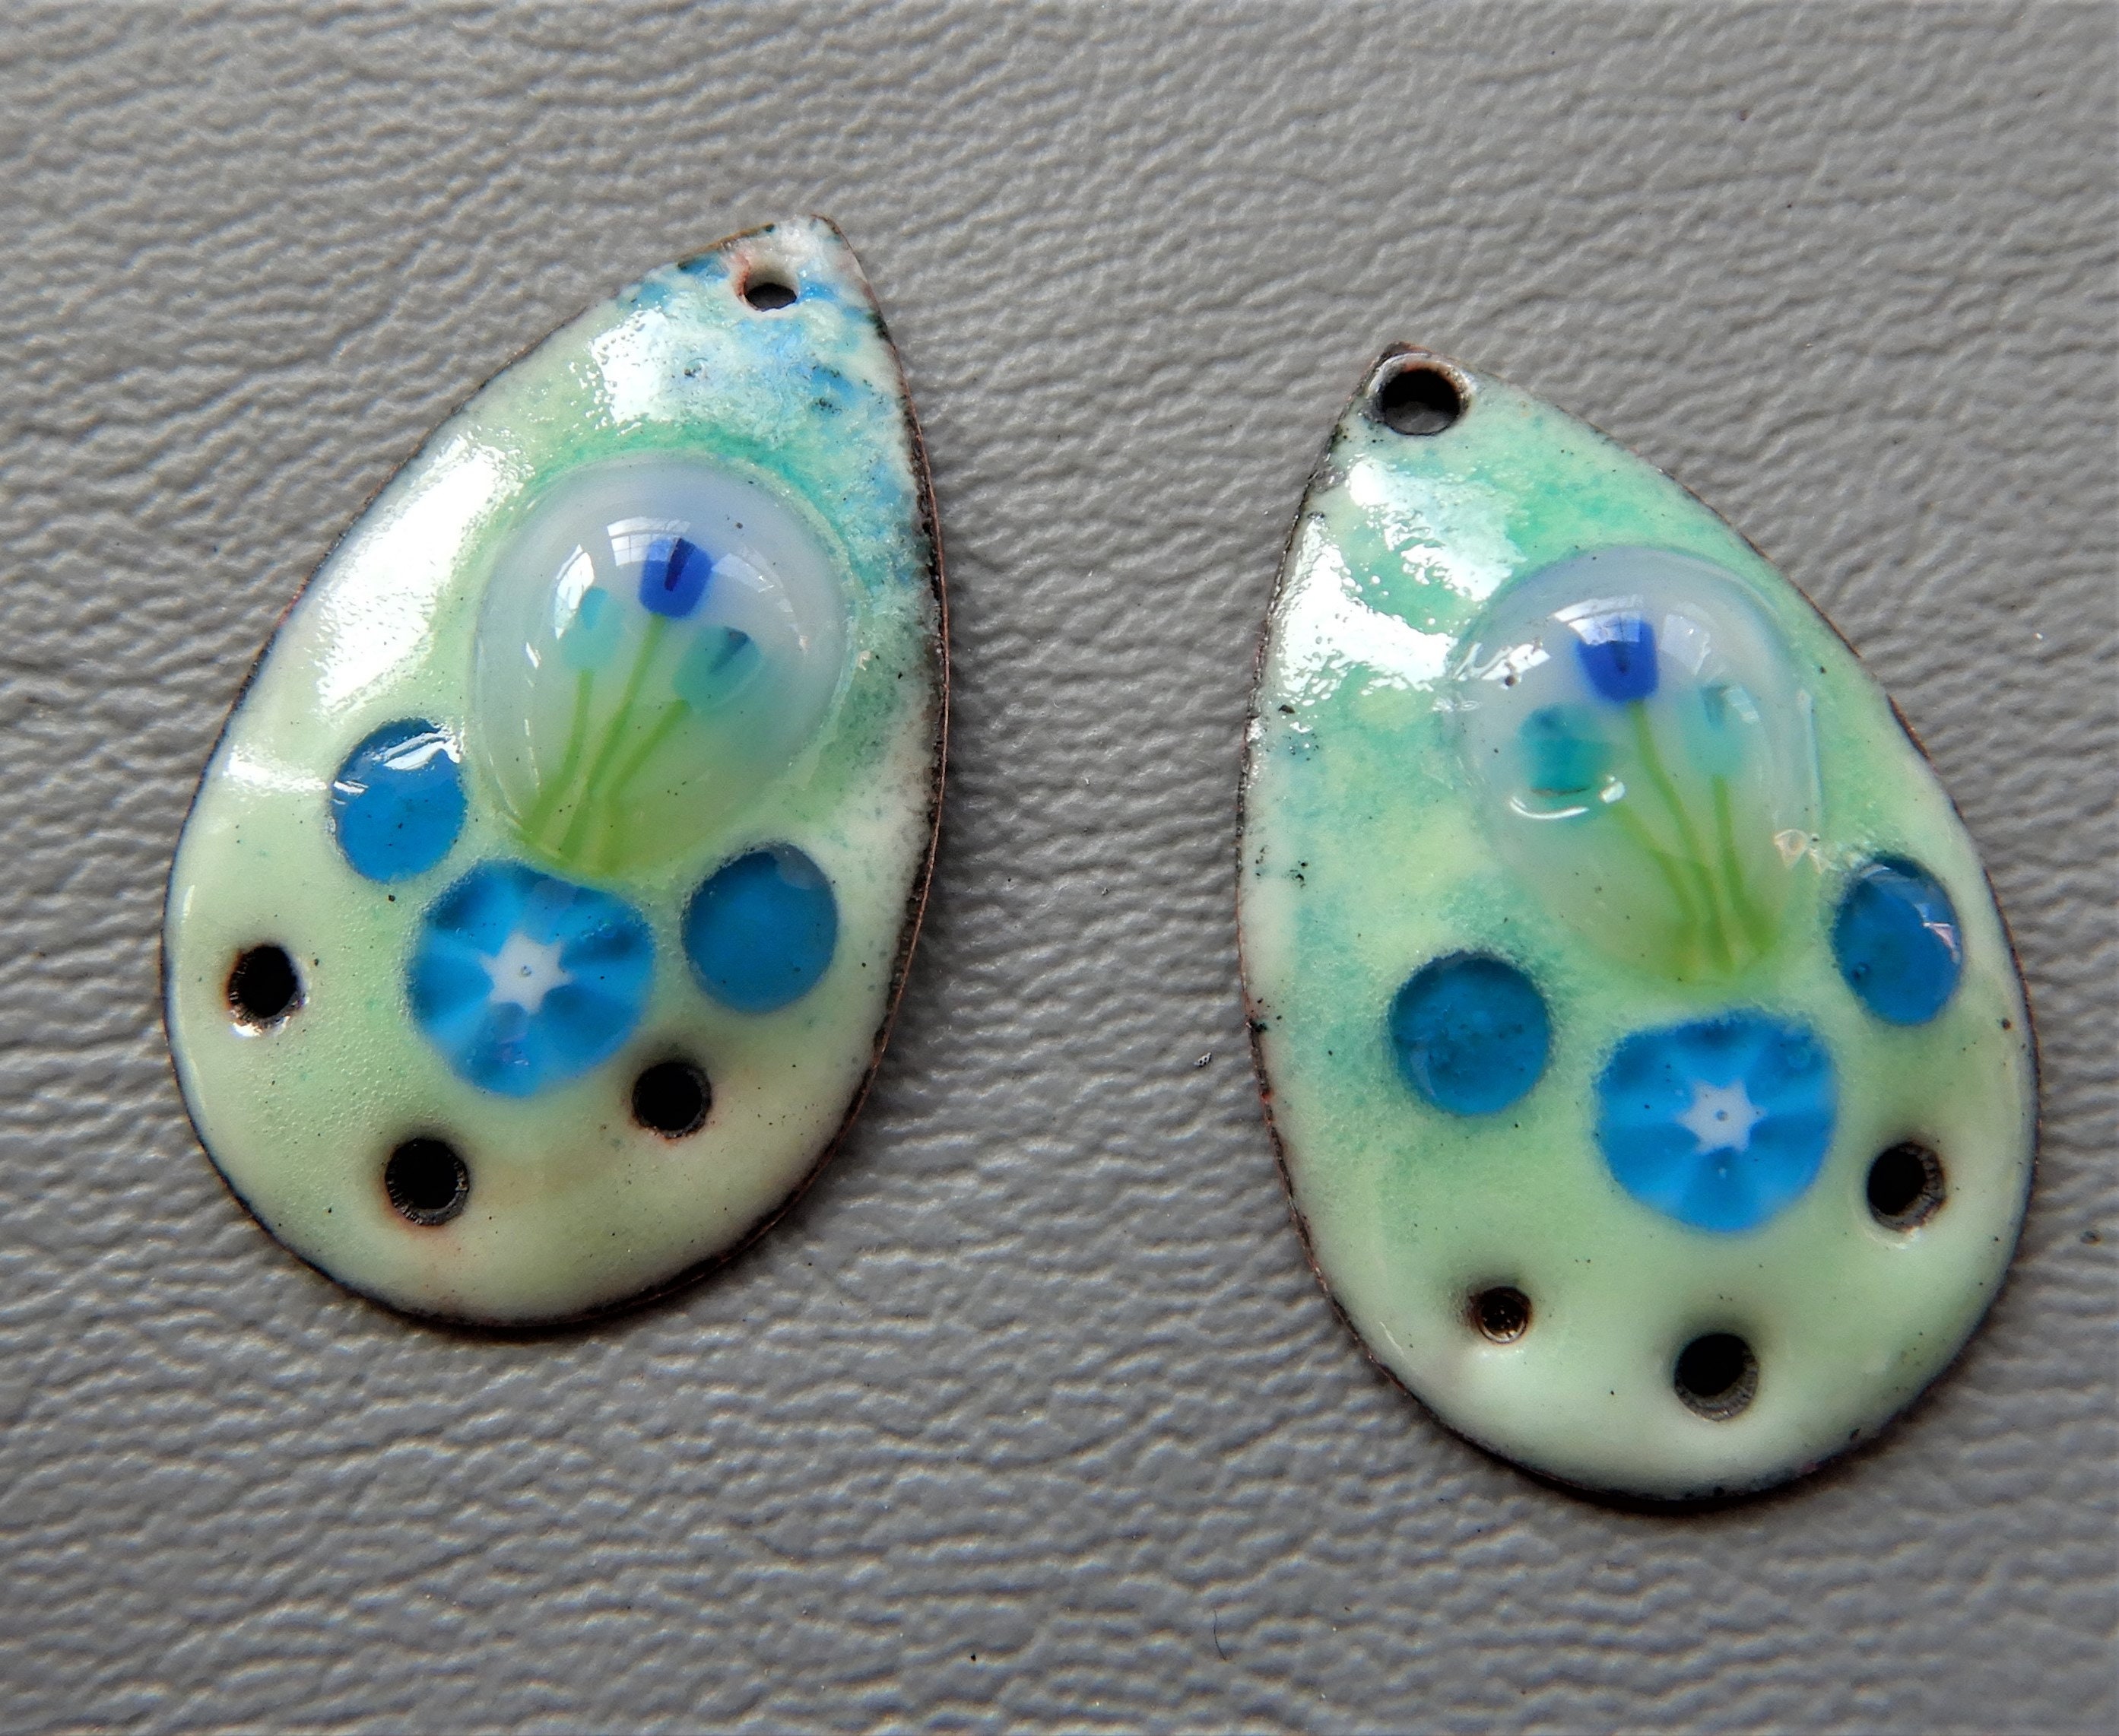 Cloisonne Flower Enamel Charms in A Beautiful Blue/Green with A Gold Finish - 3D Enamel Flower Charms/Pendants/Connectors